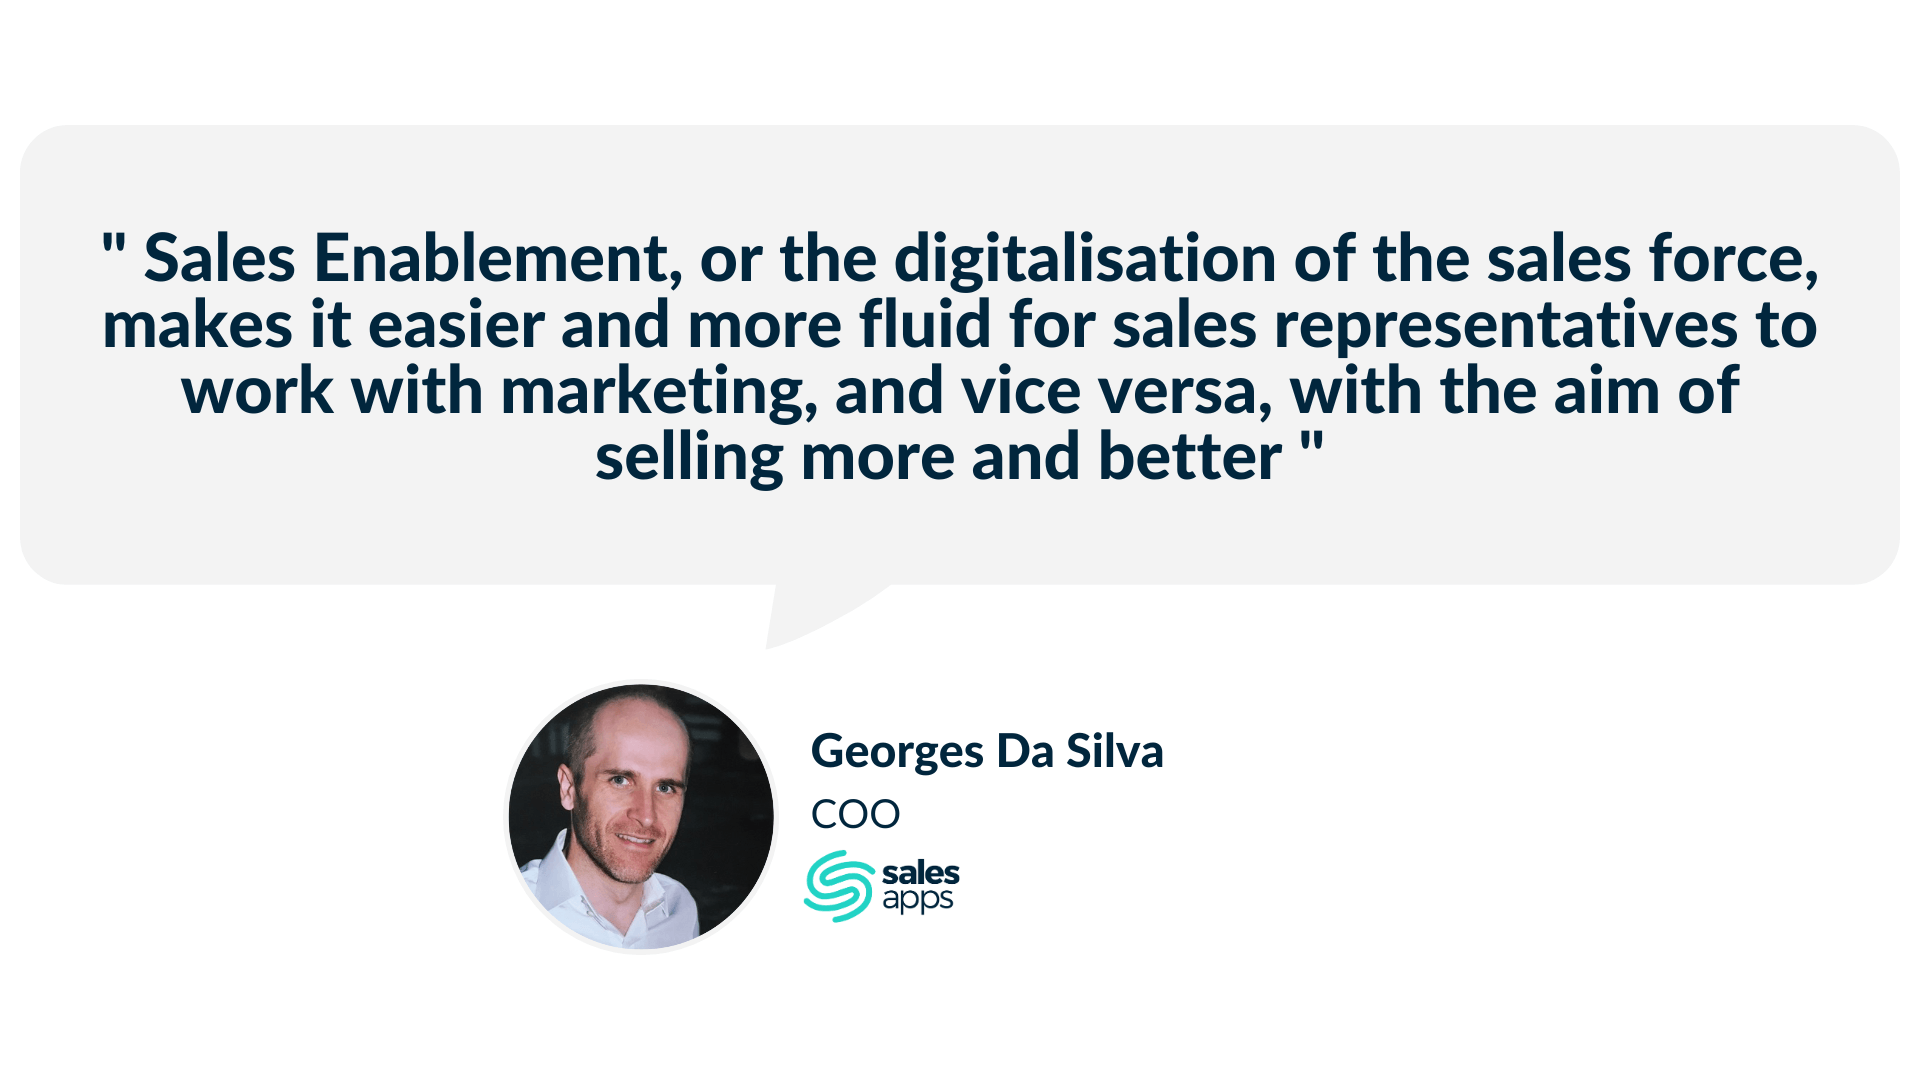 Sales Enablement explained by Georges Da Silva, COO Salesapps.